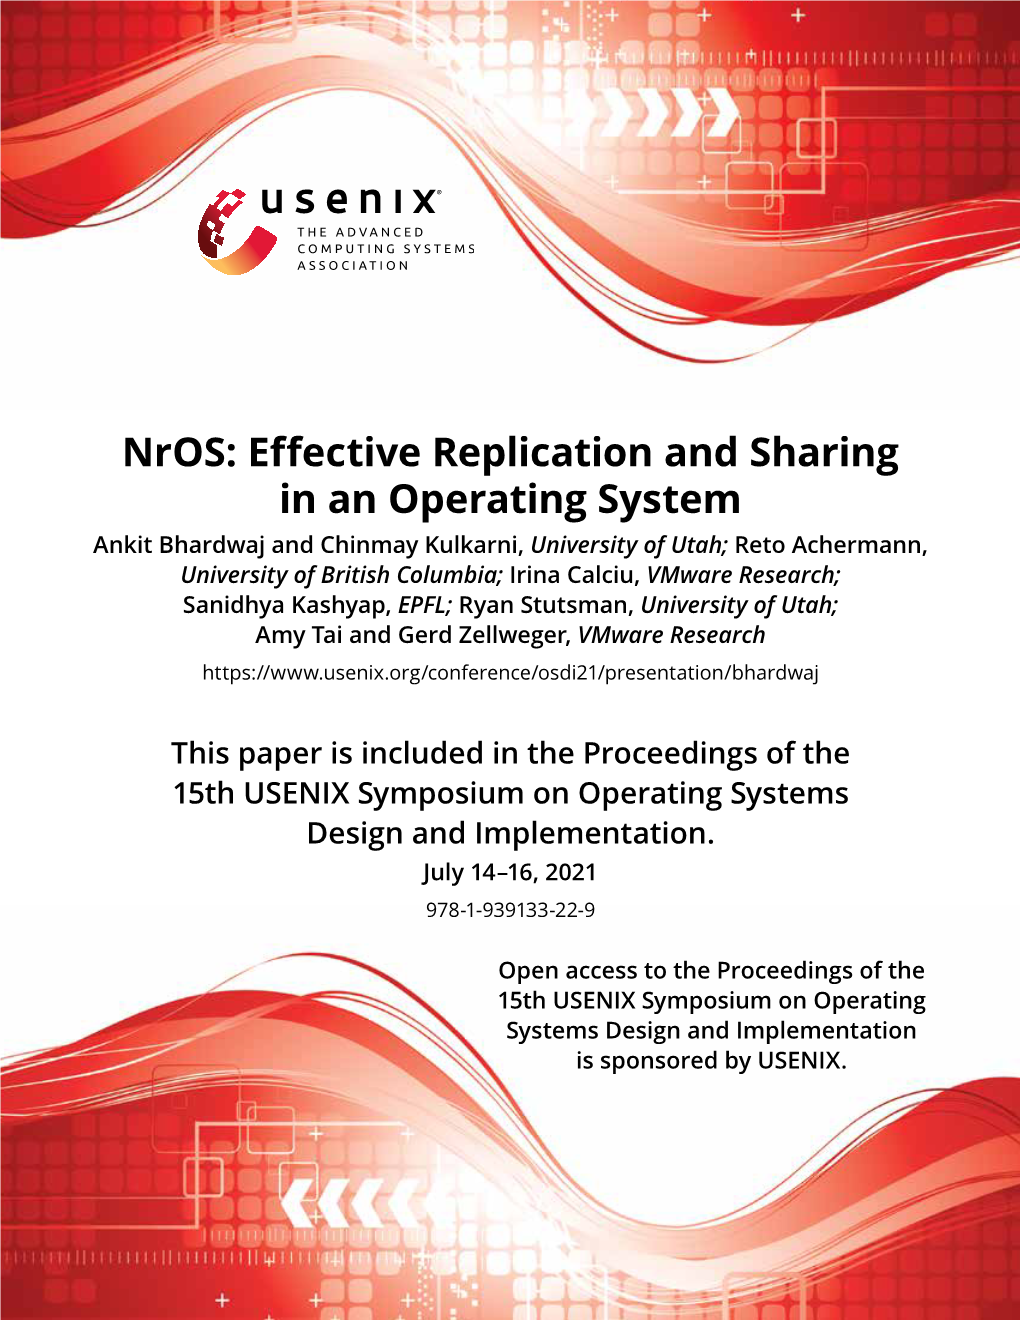 Nros: Effective Replication and Sharing in an Operating System